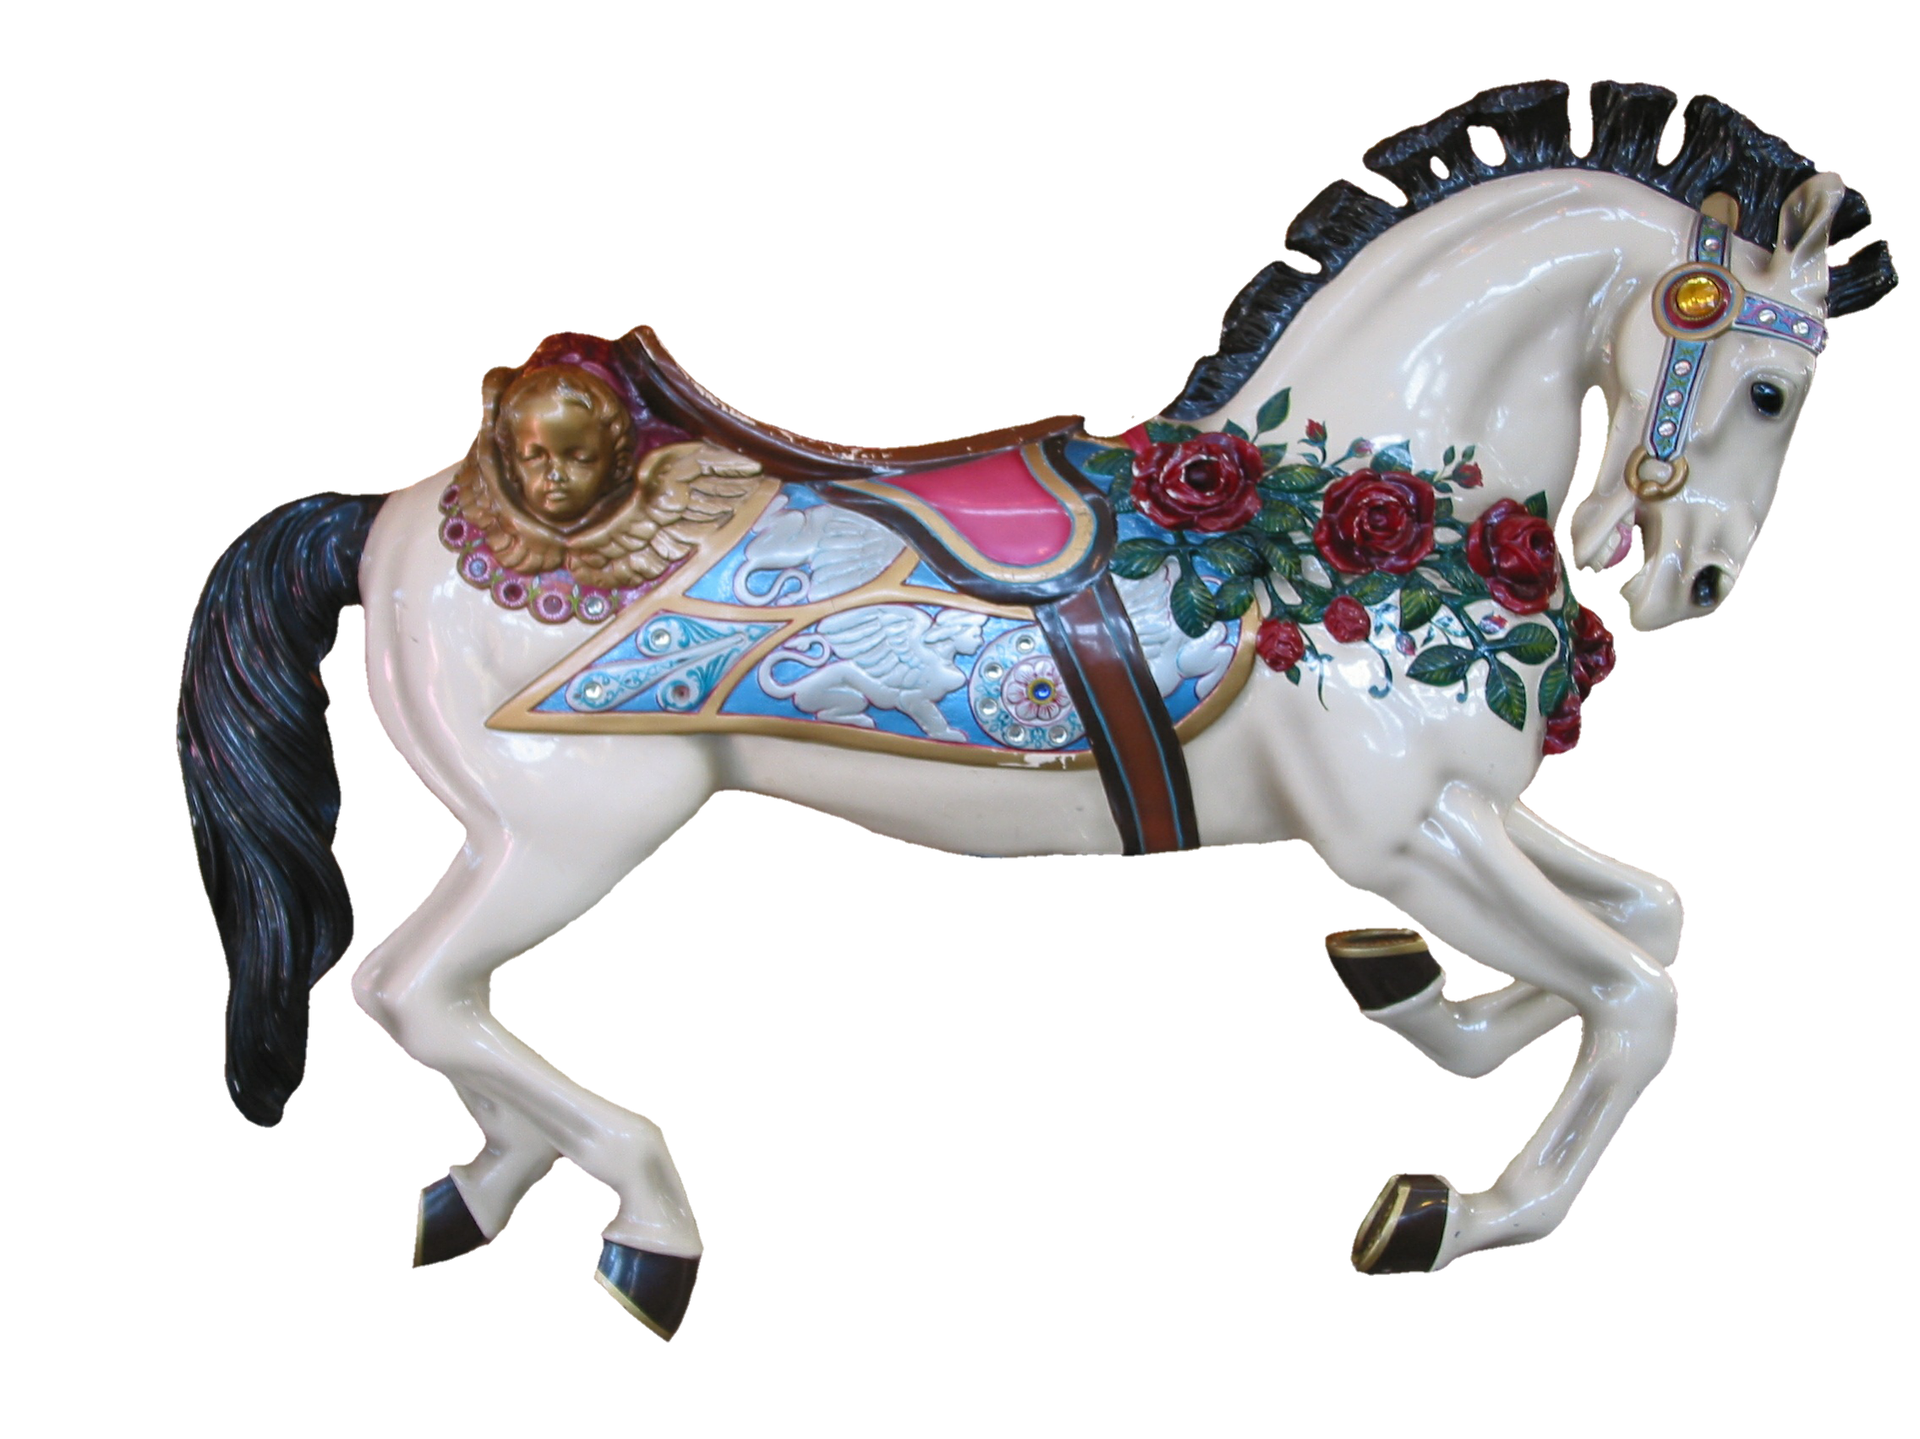 carousel-horse-g54bc82e1c_1920.png